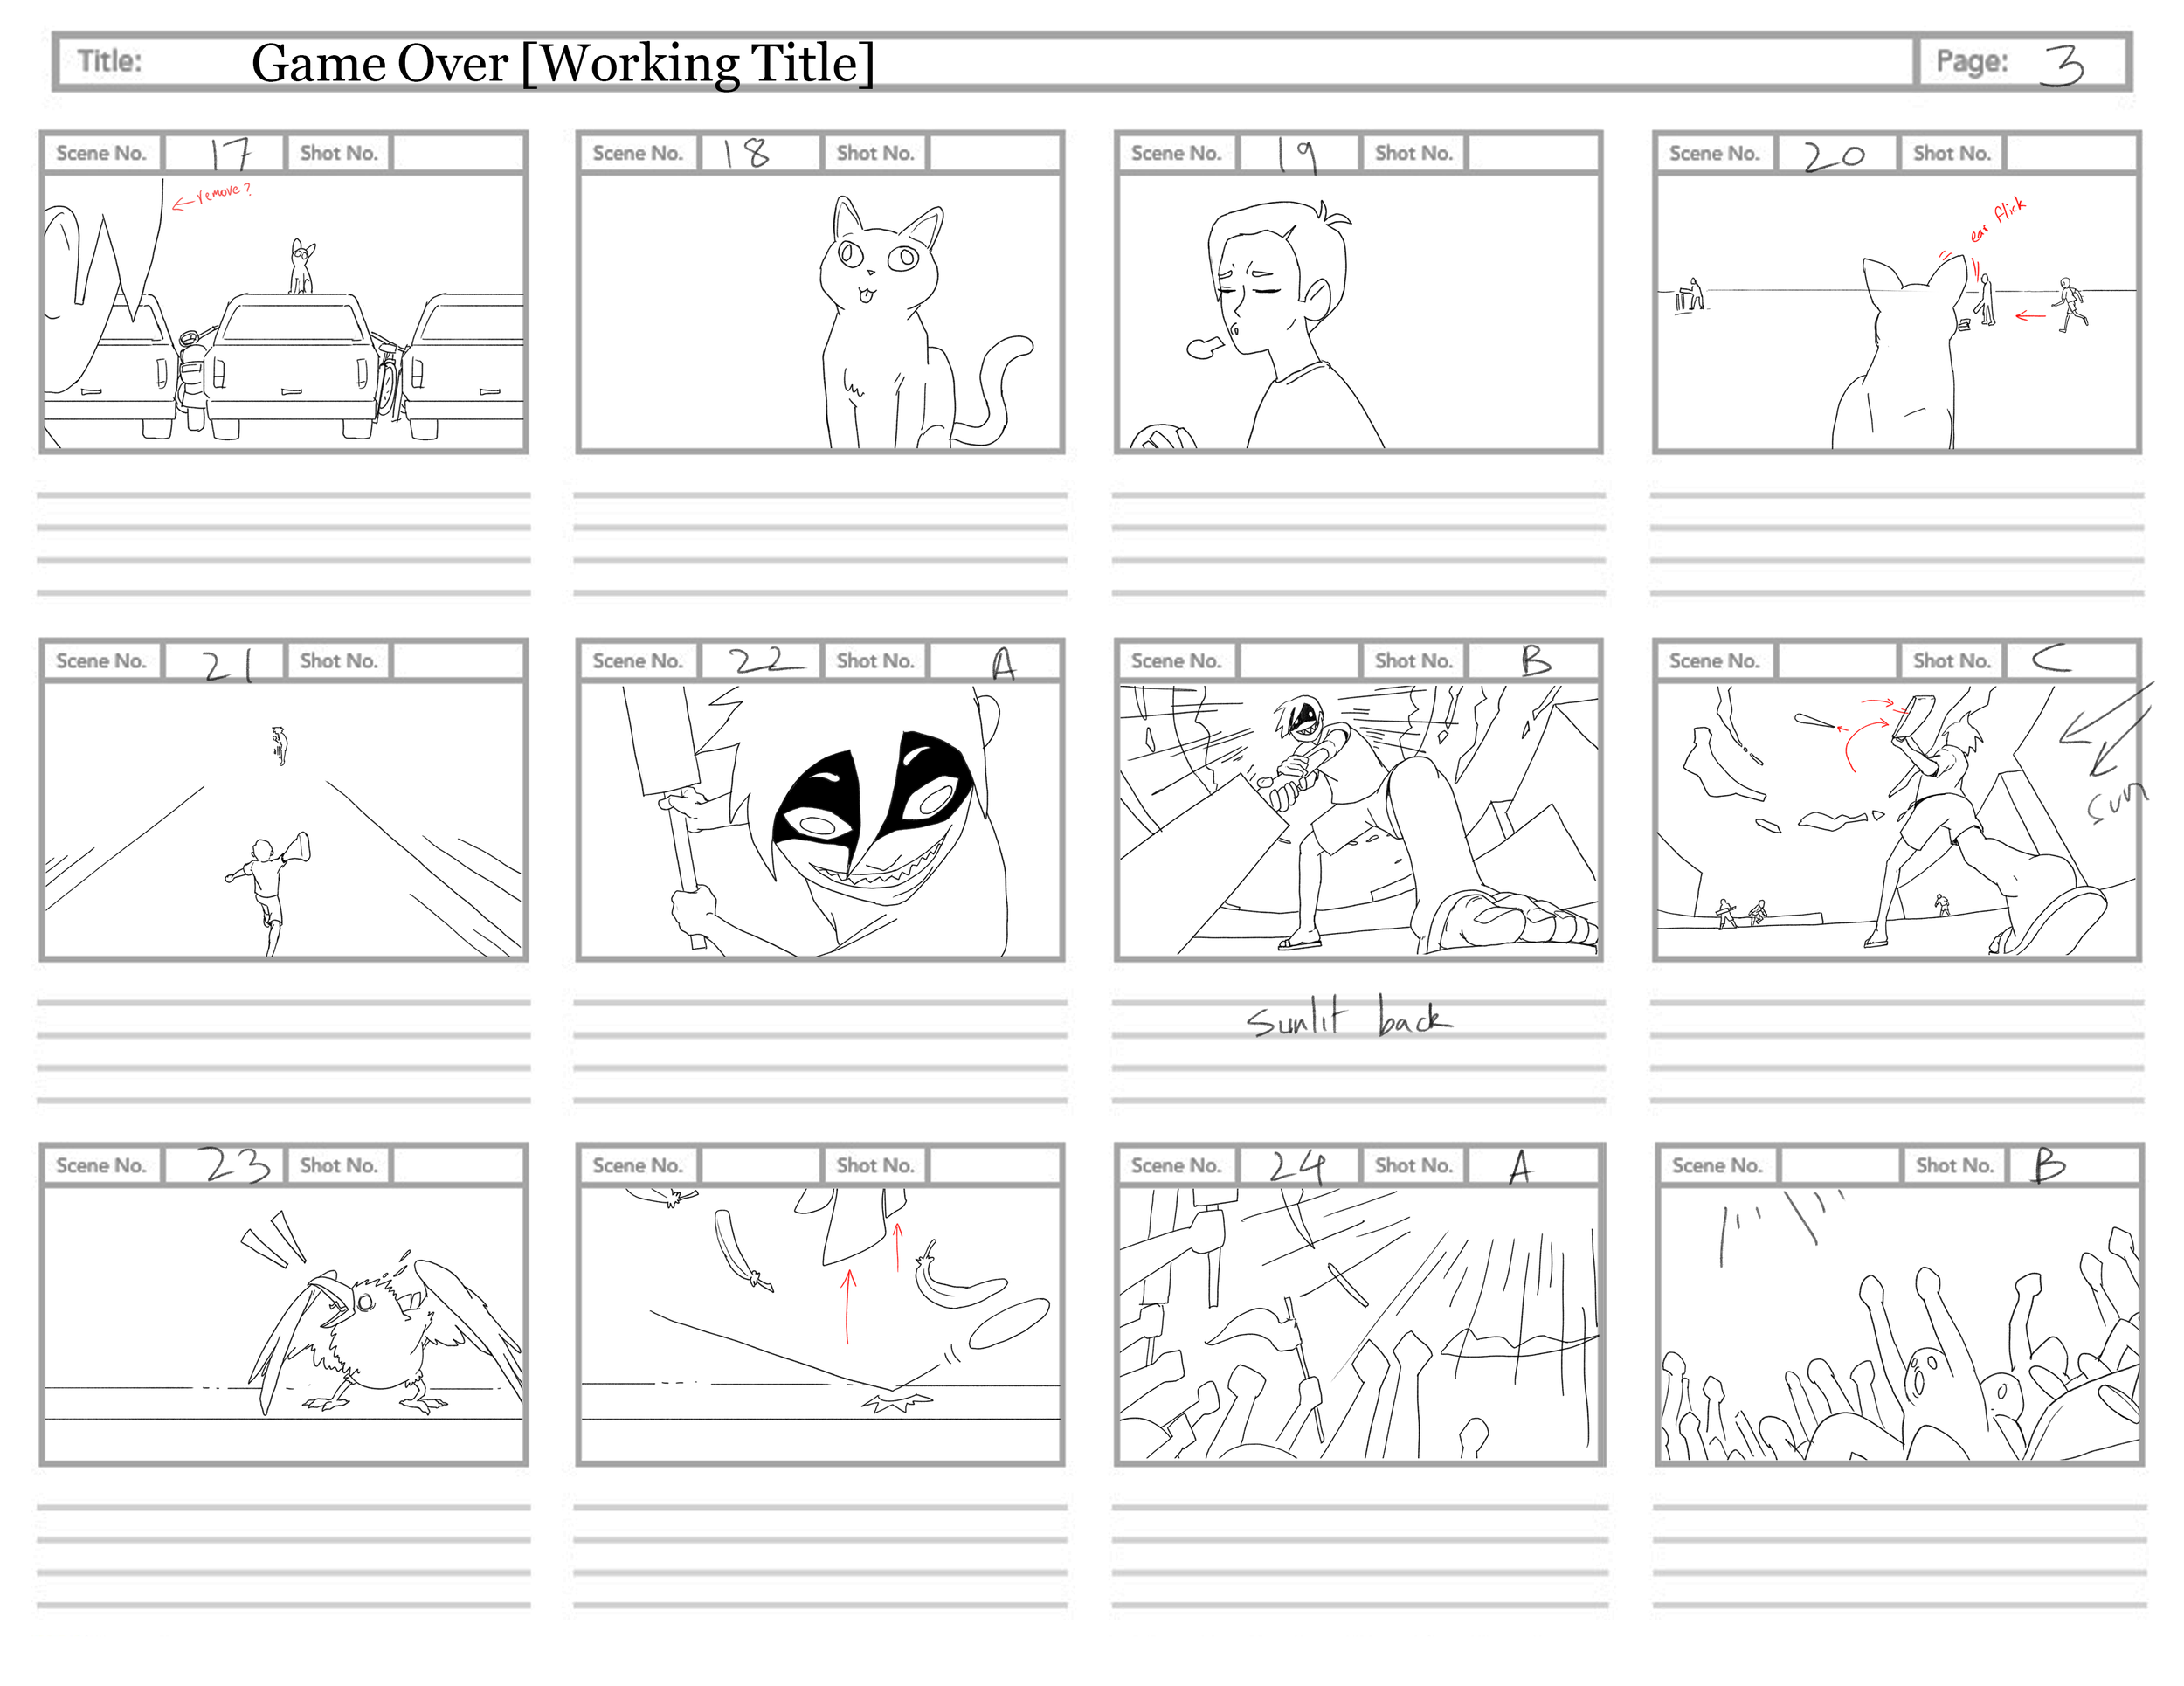 Storyboard_page 3.png